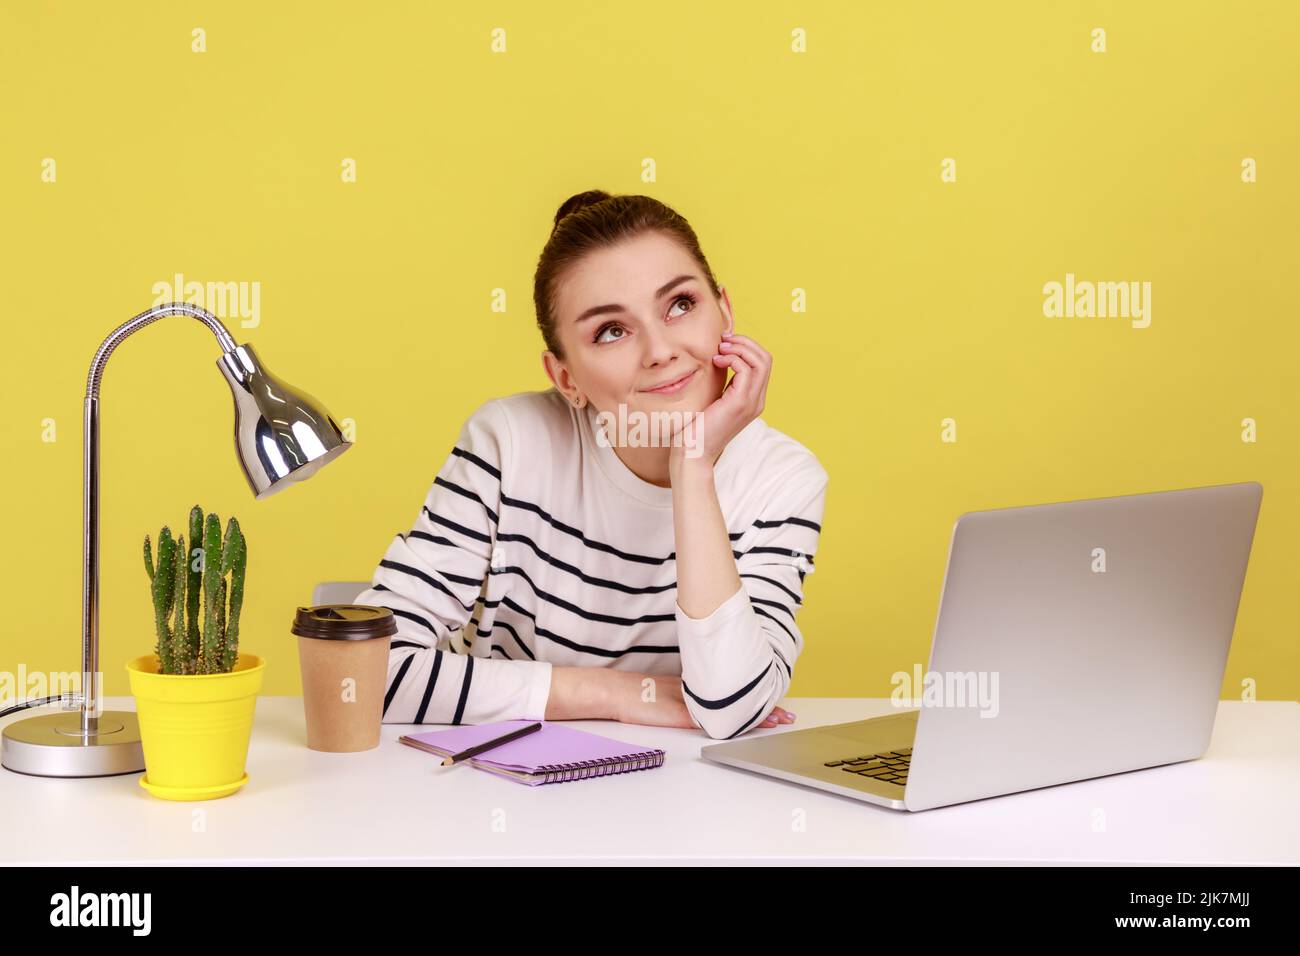 Happy woman dreaming of vacation, resting on break, relaxing with thoughtful meditative expression while working at home office. Indoor studio studio shot isolated on yellow background. Stock Photo